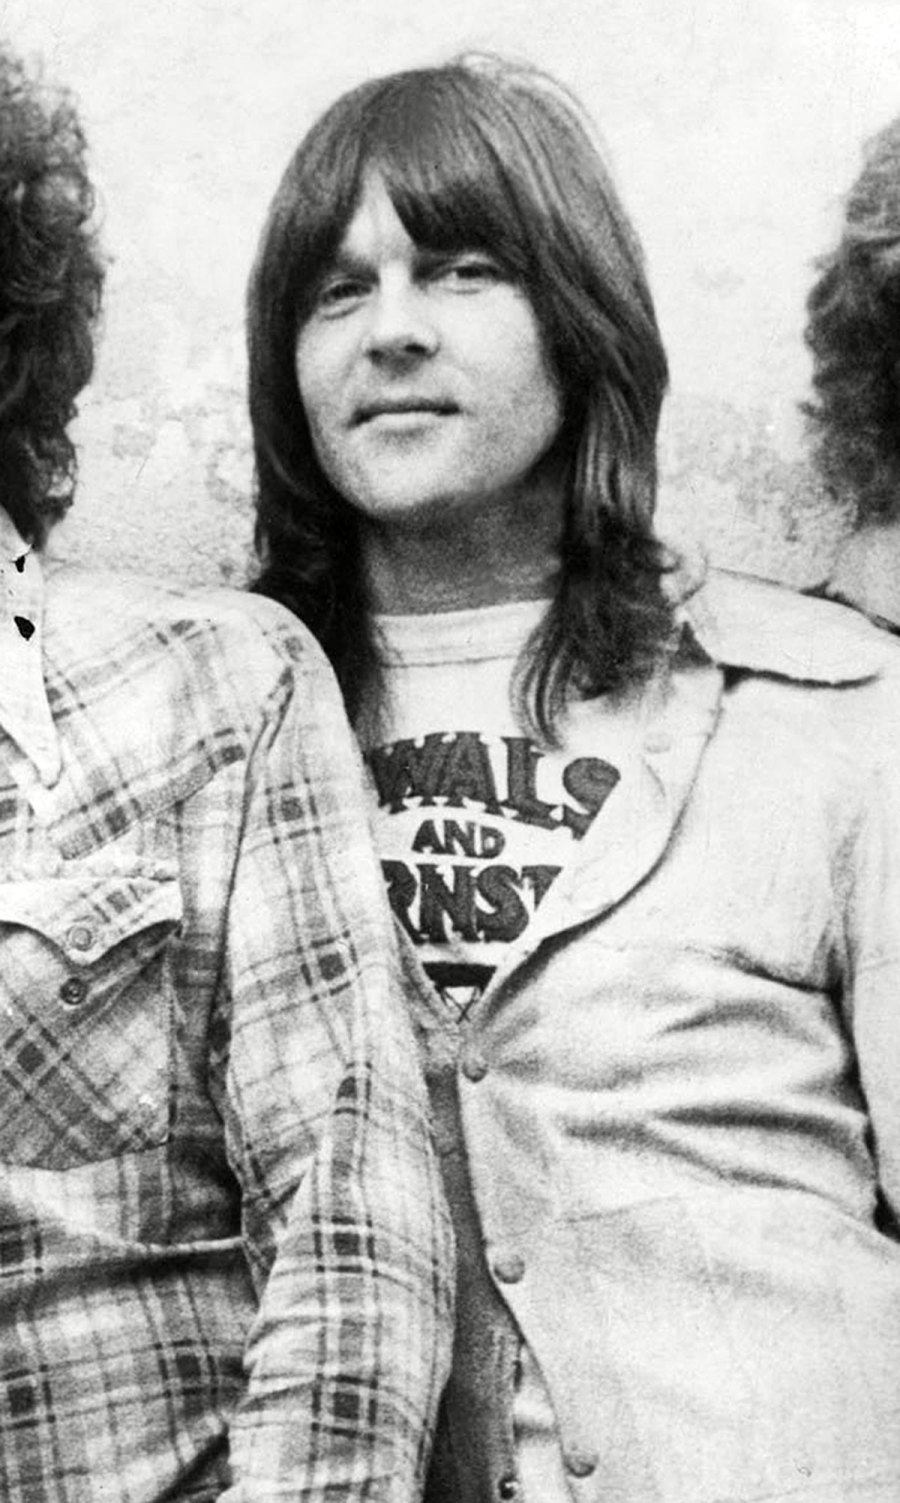 Randy Meisner Founding Member of The Eagles Dead at Age 77